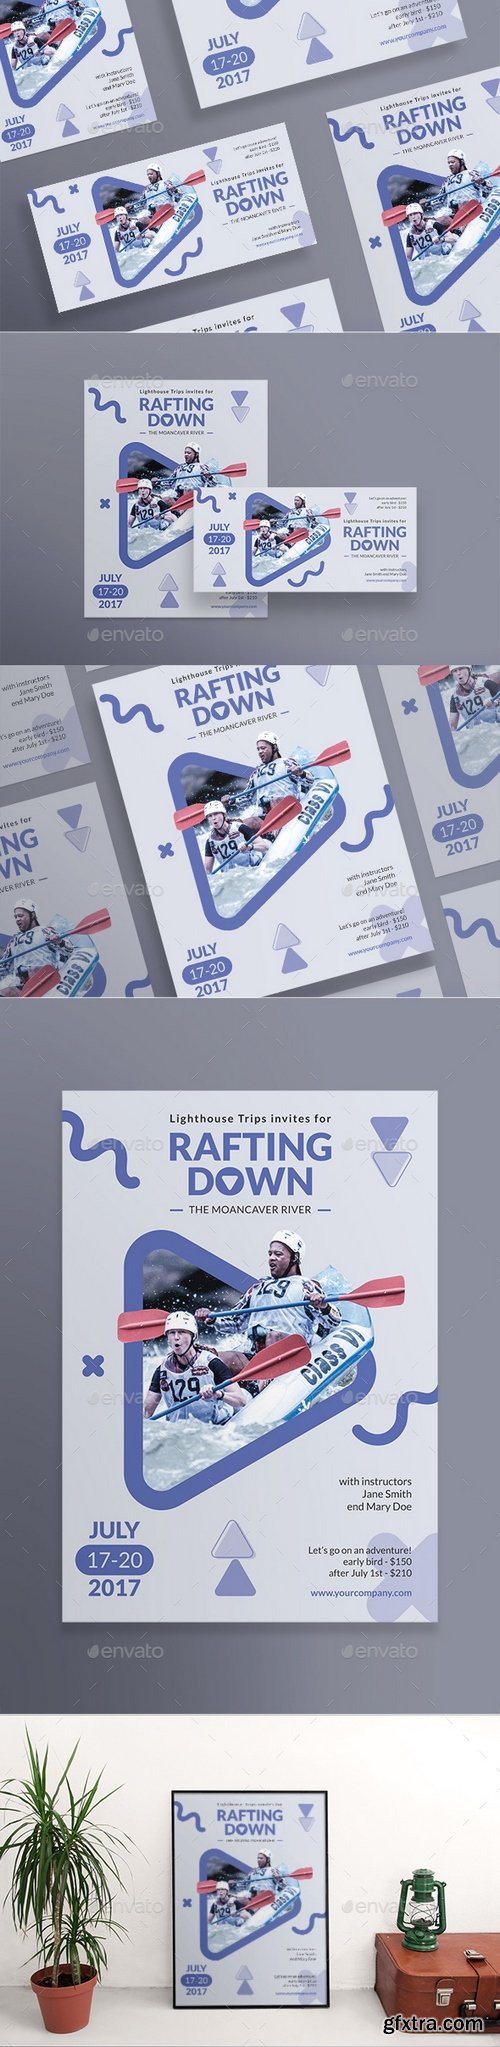 Graphicriver - Rafting Flyers 20625083